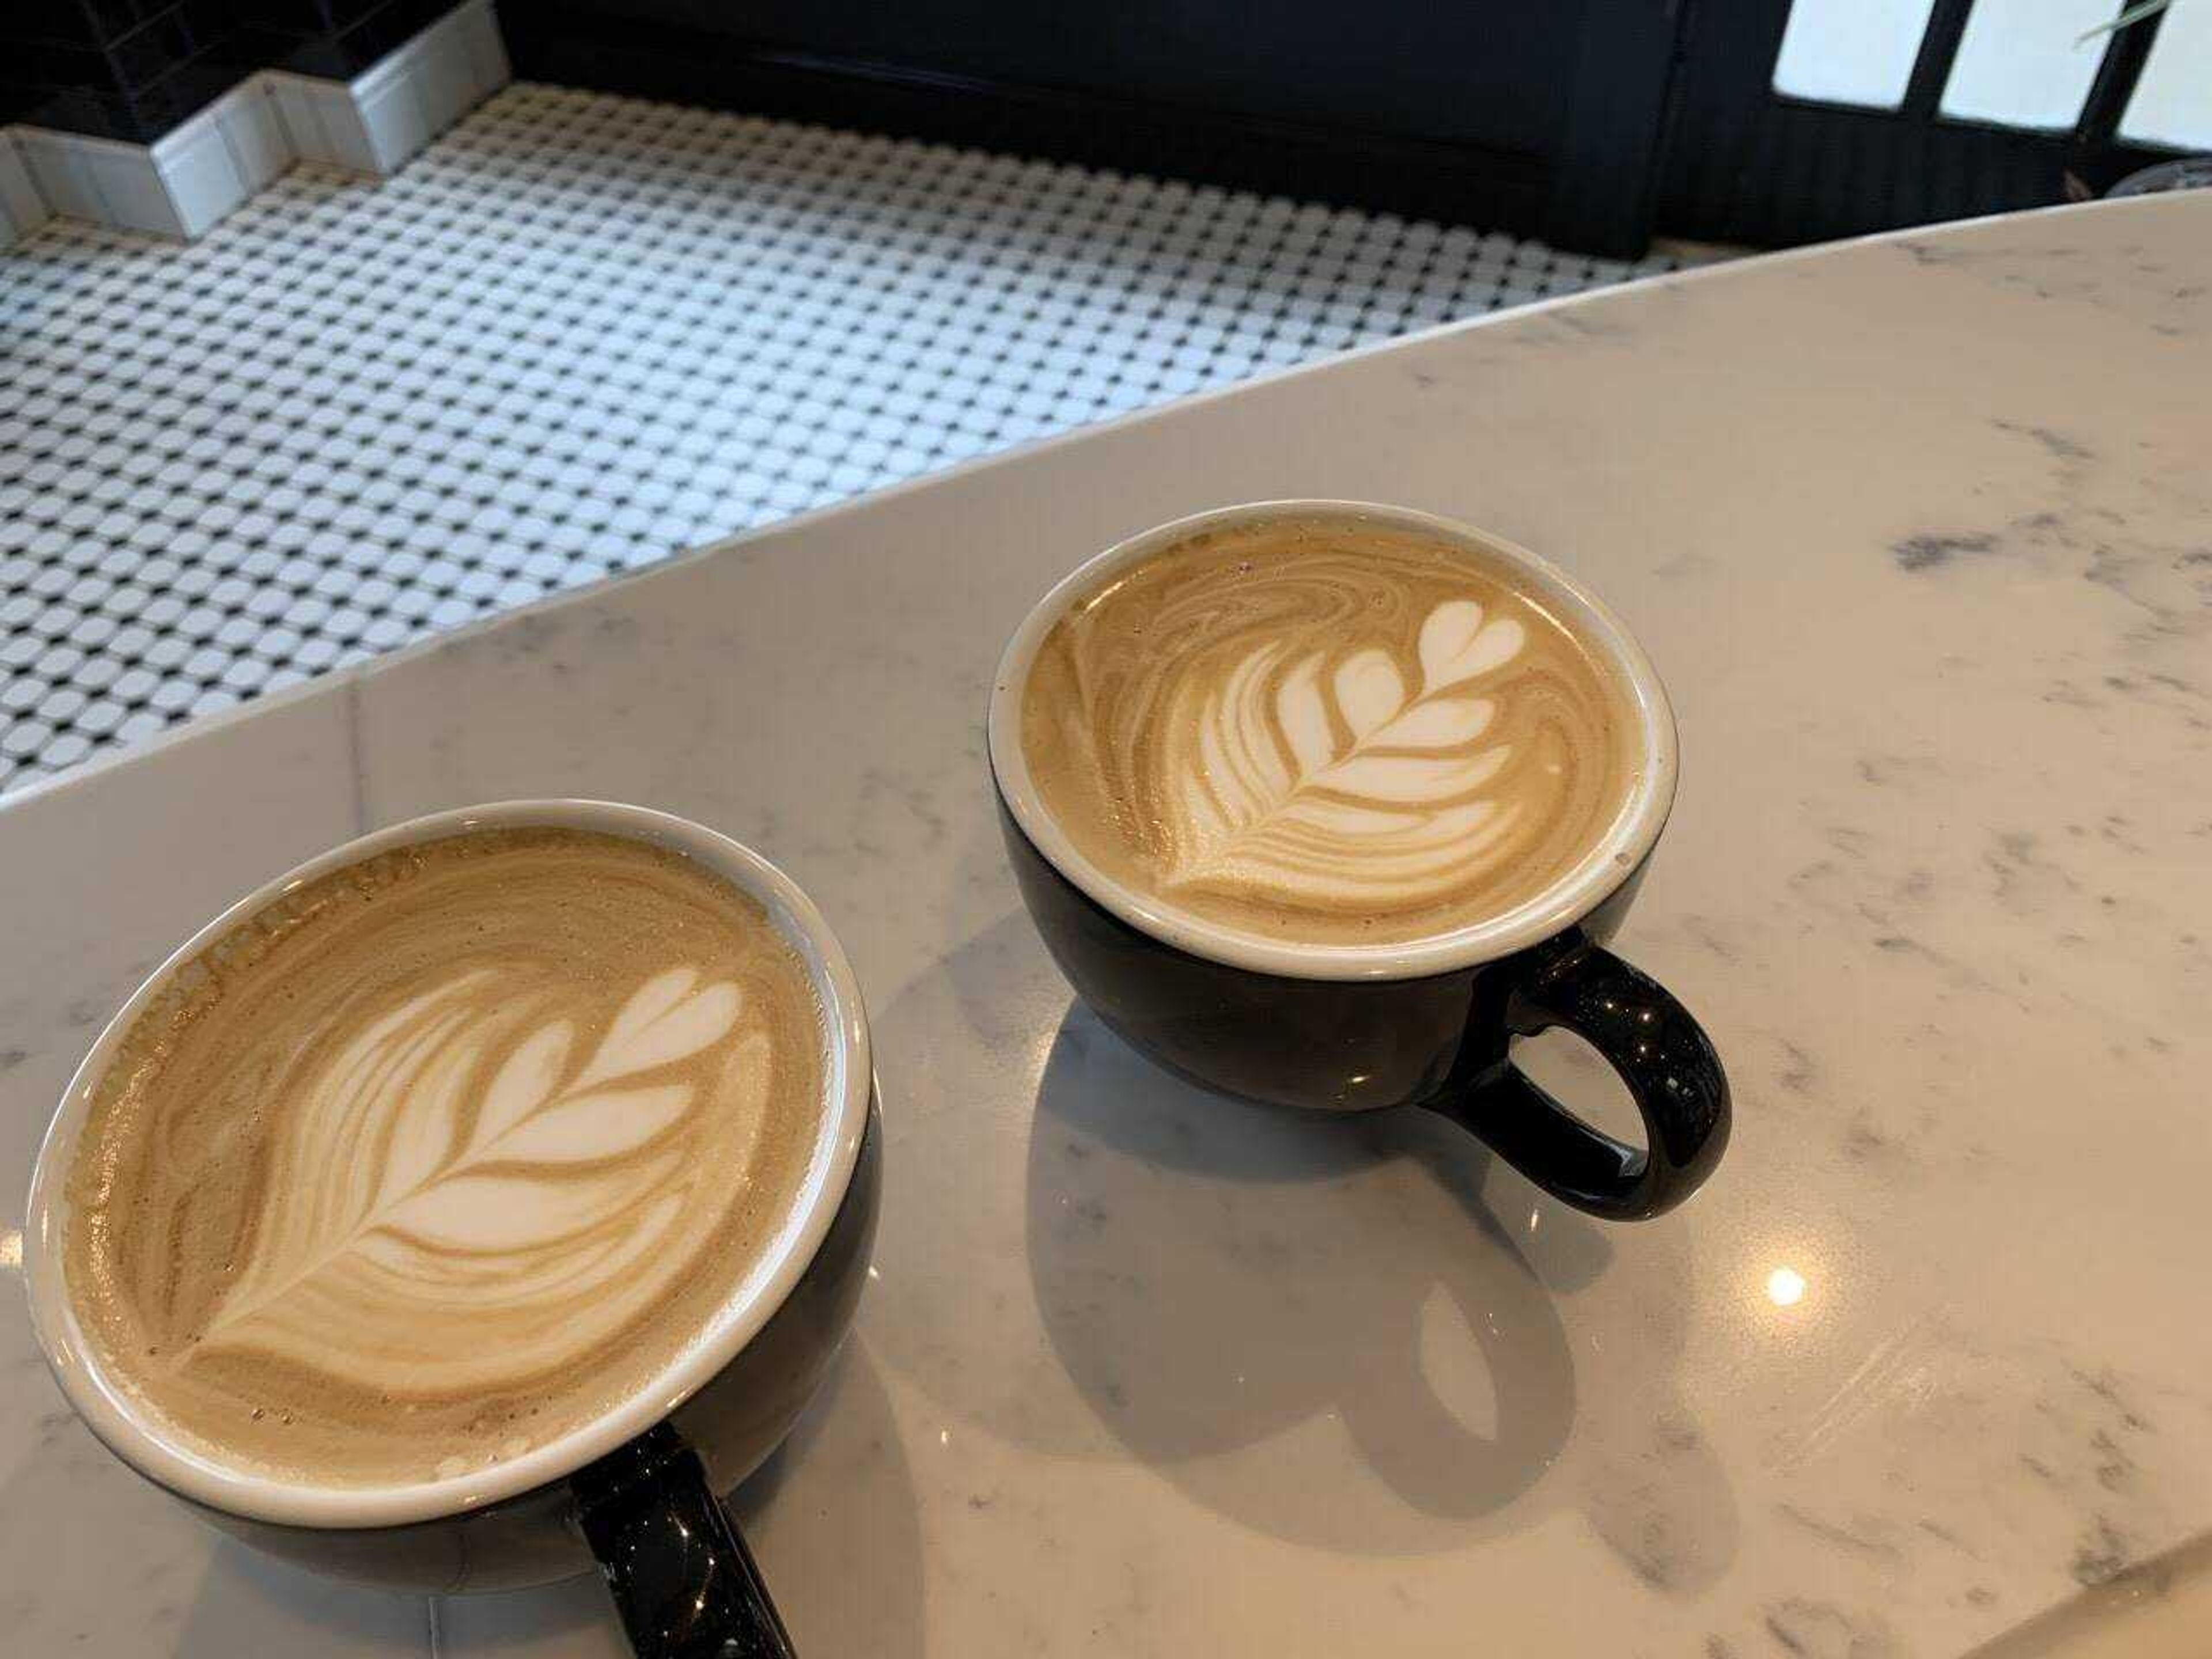 Baker said he enjoys creating latte art customers, as it provides a fun “surprise” element to their java. 